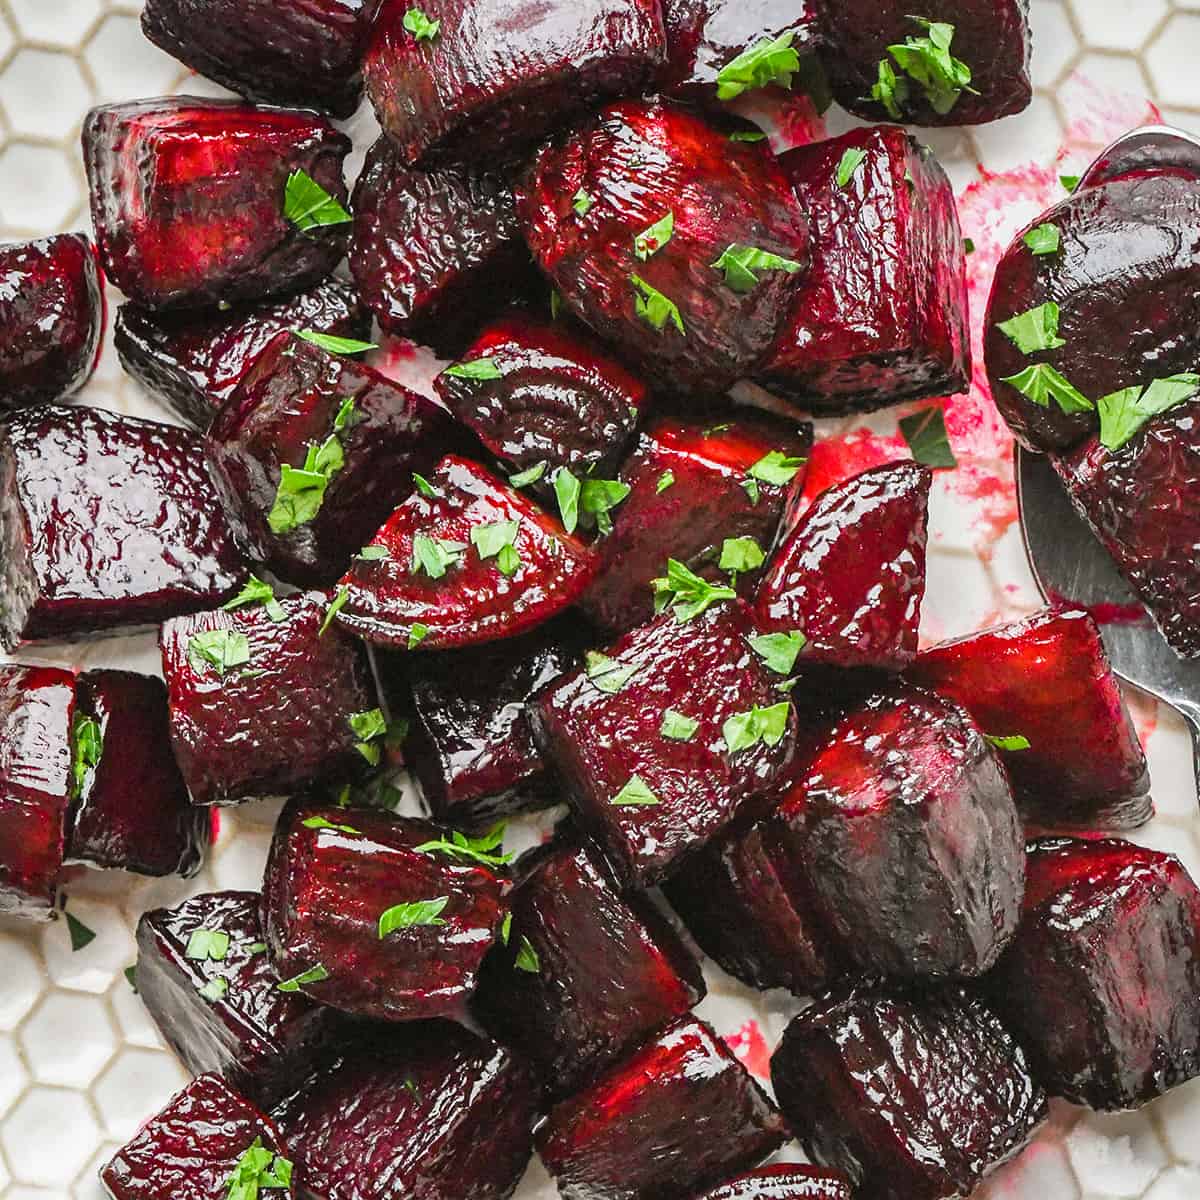 oven roasted beets on a plate garnished with beet greens